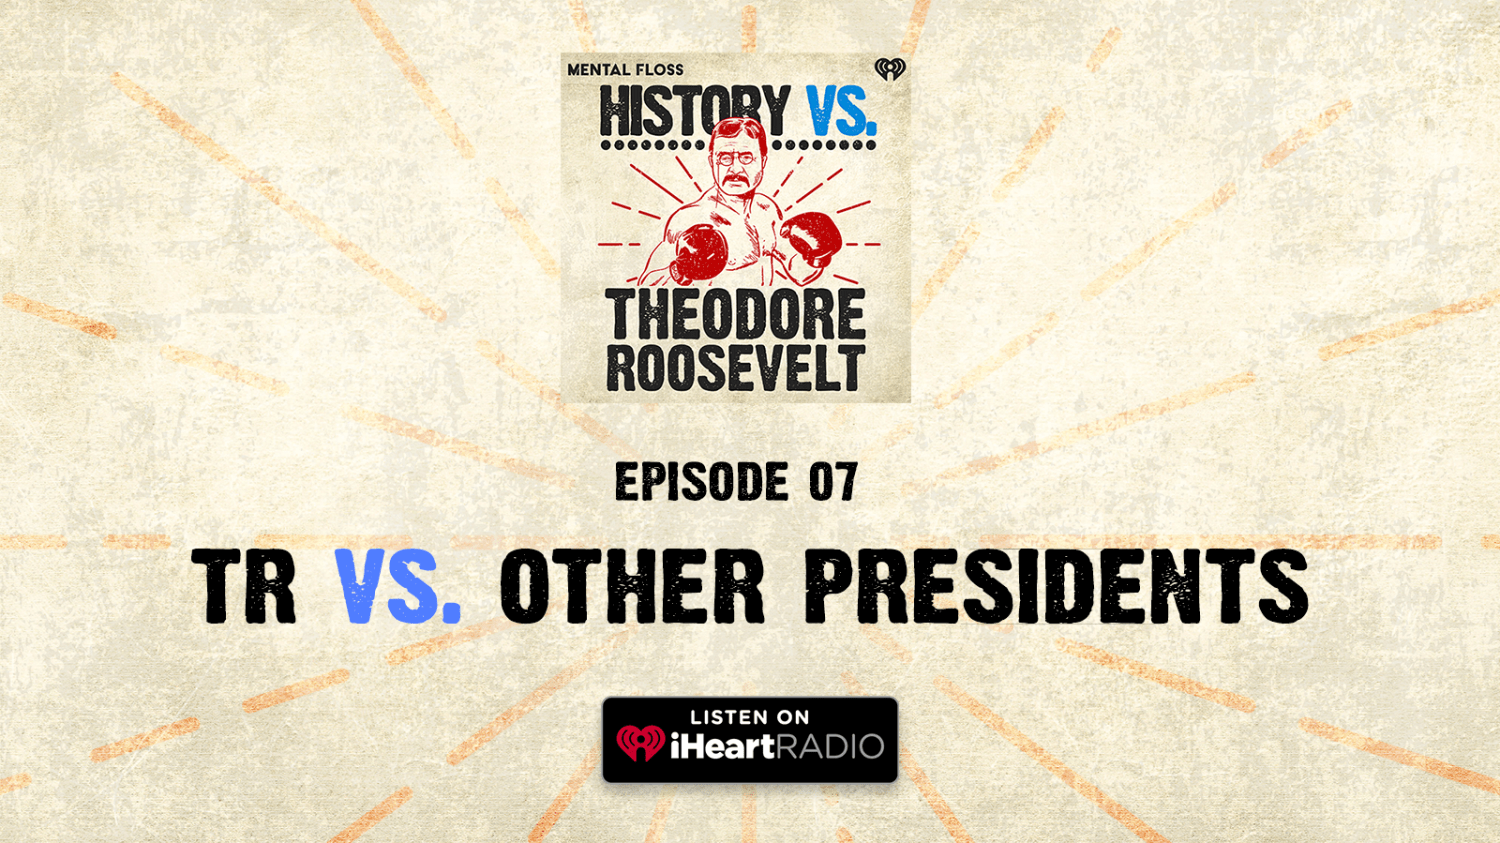 History Vs. Episode 7: Theodore Roosevelt Vs. Other Presidents